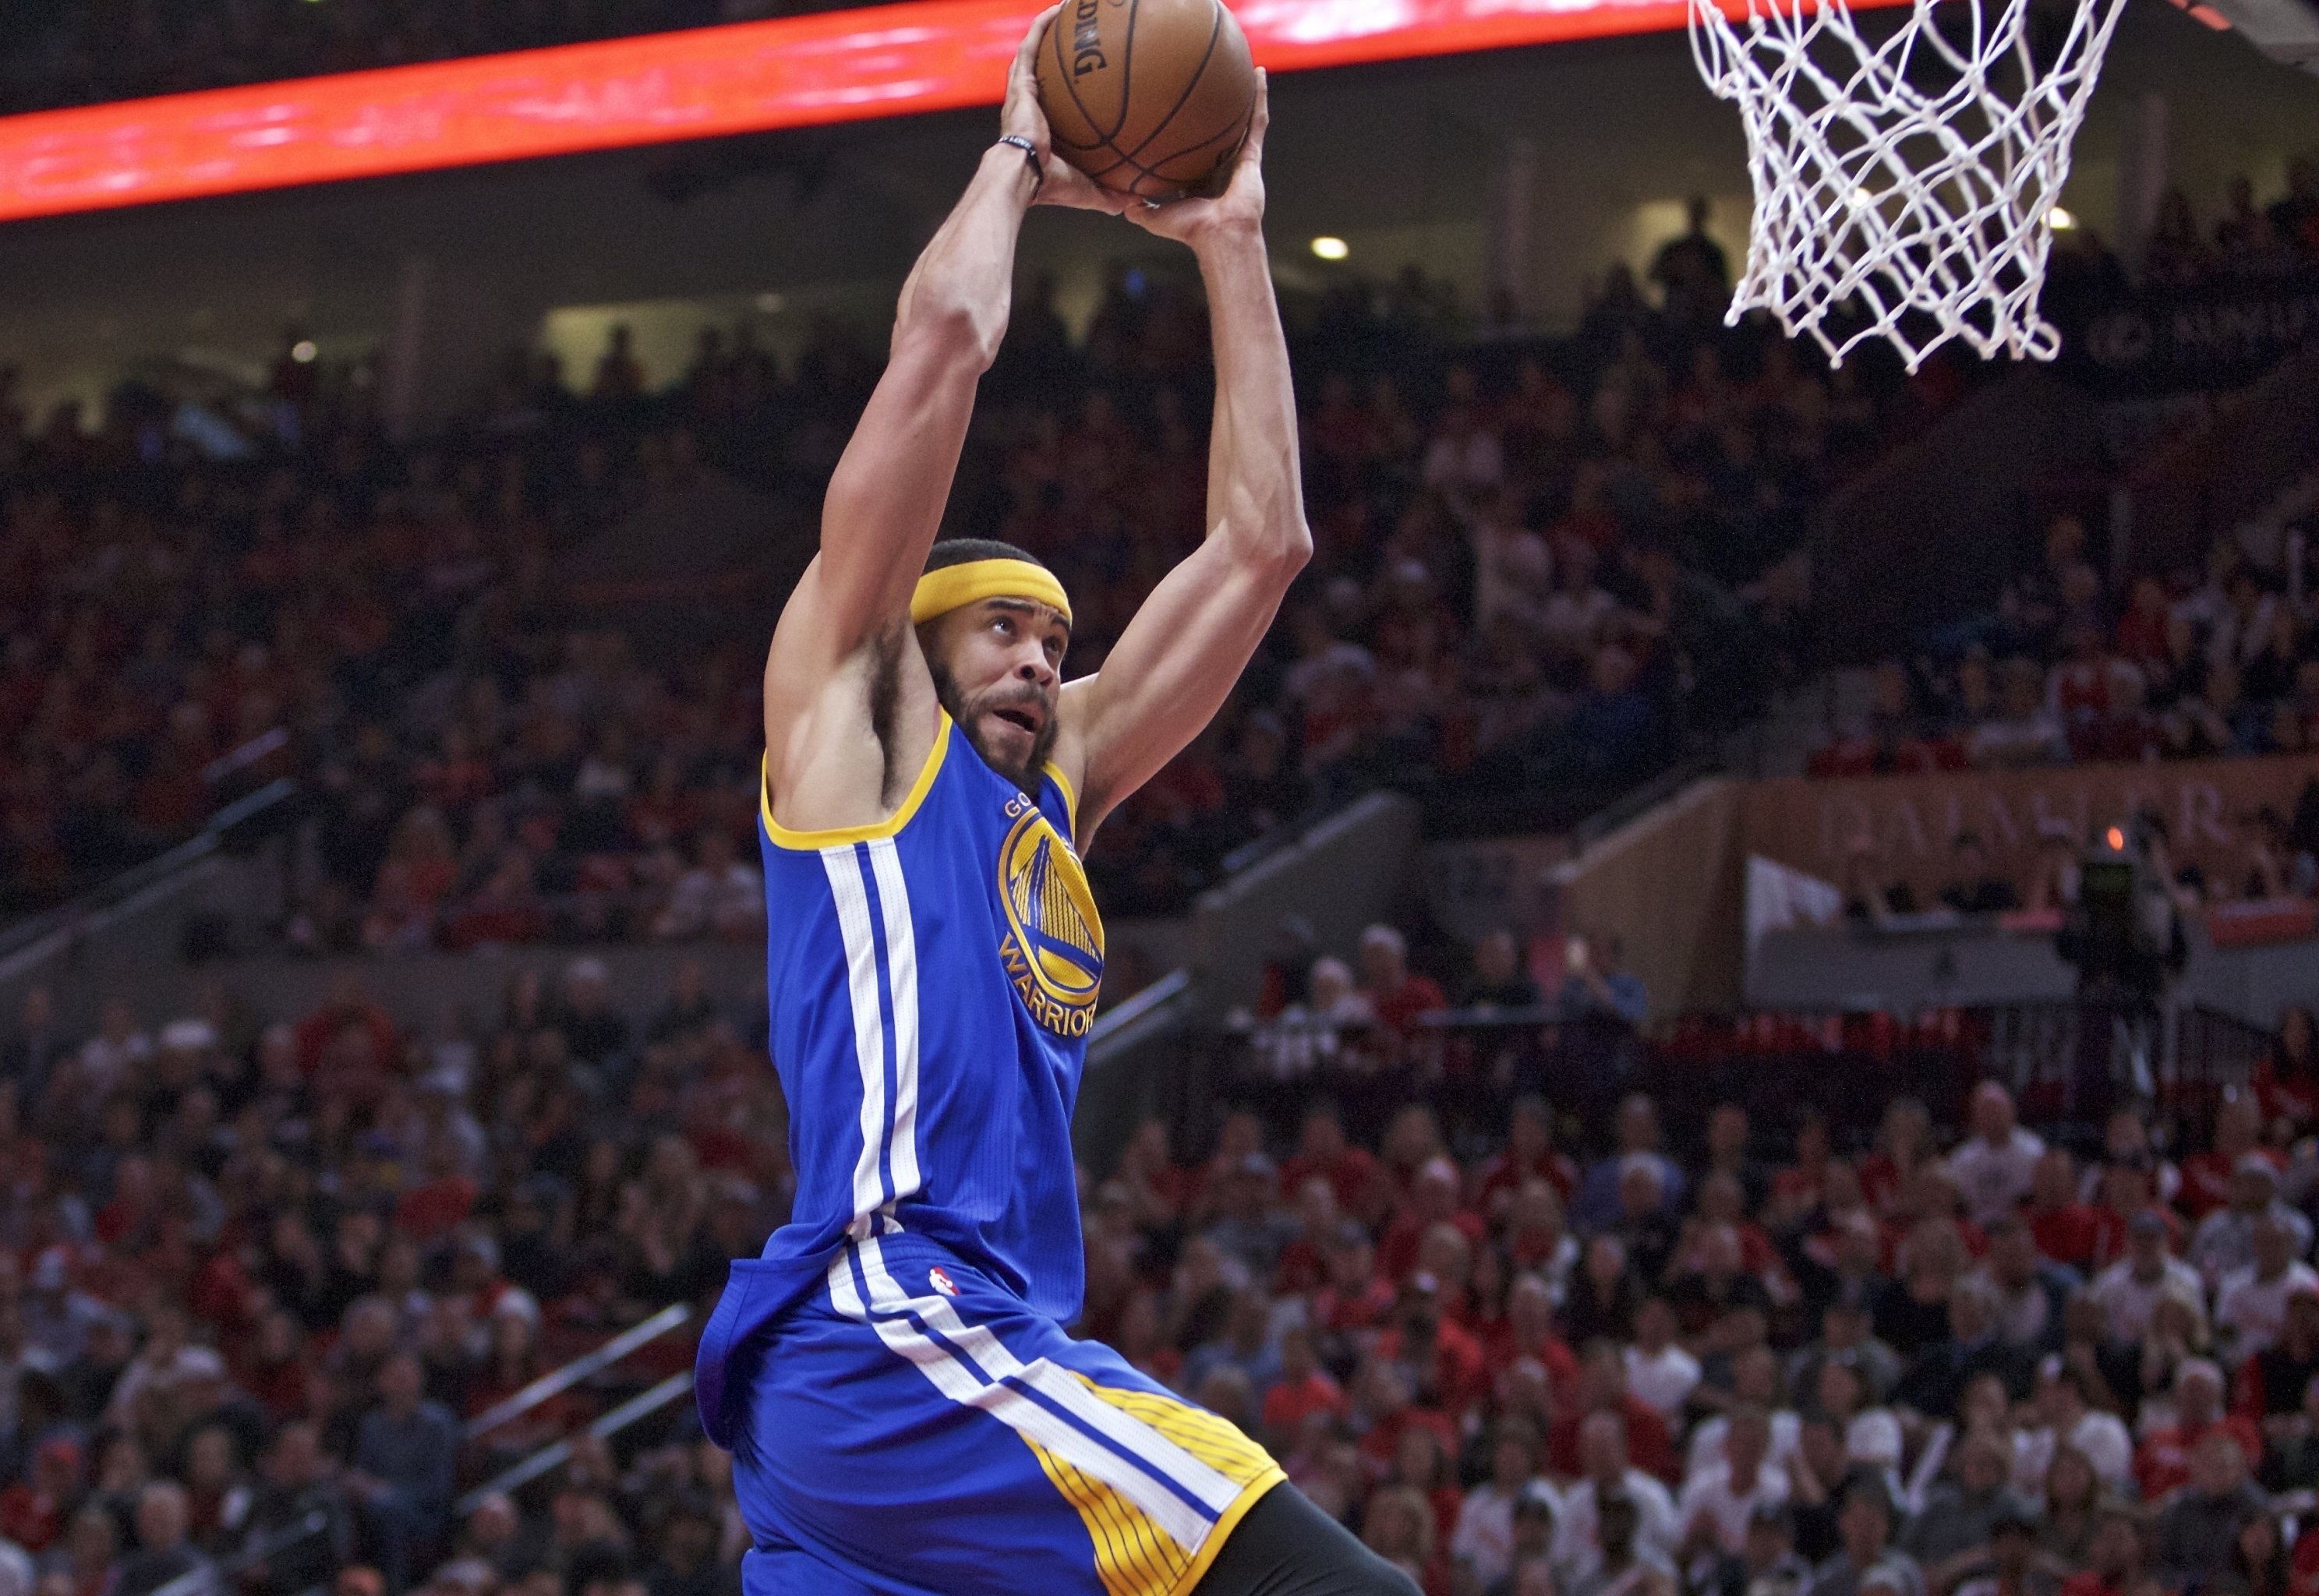 DraftExpress - JaVale McGee DraftExpress Profile: Stats